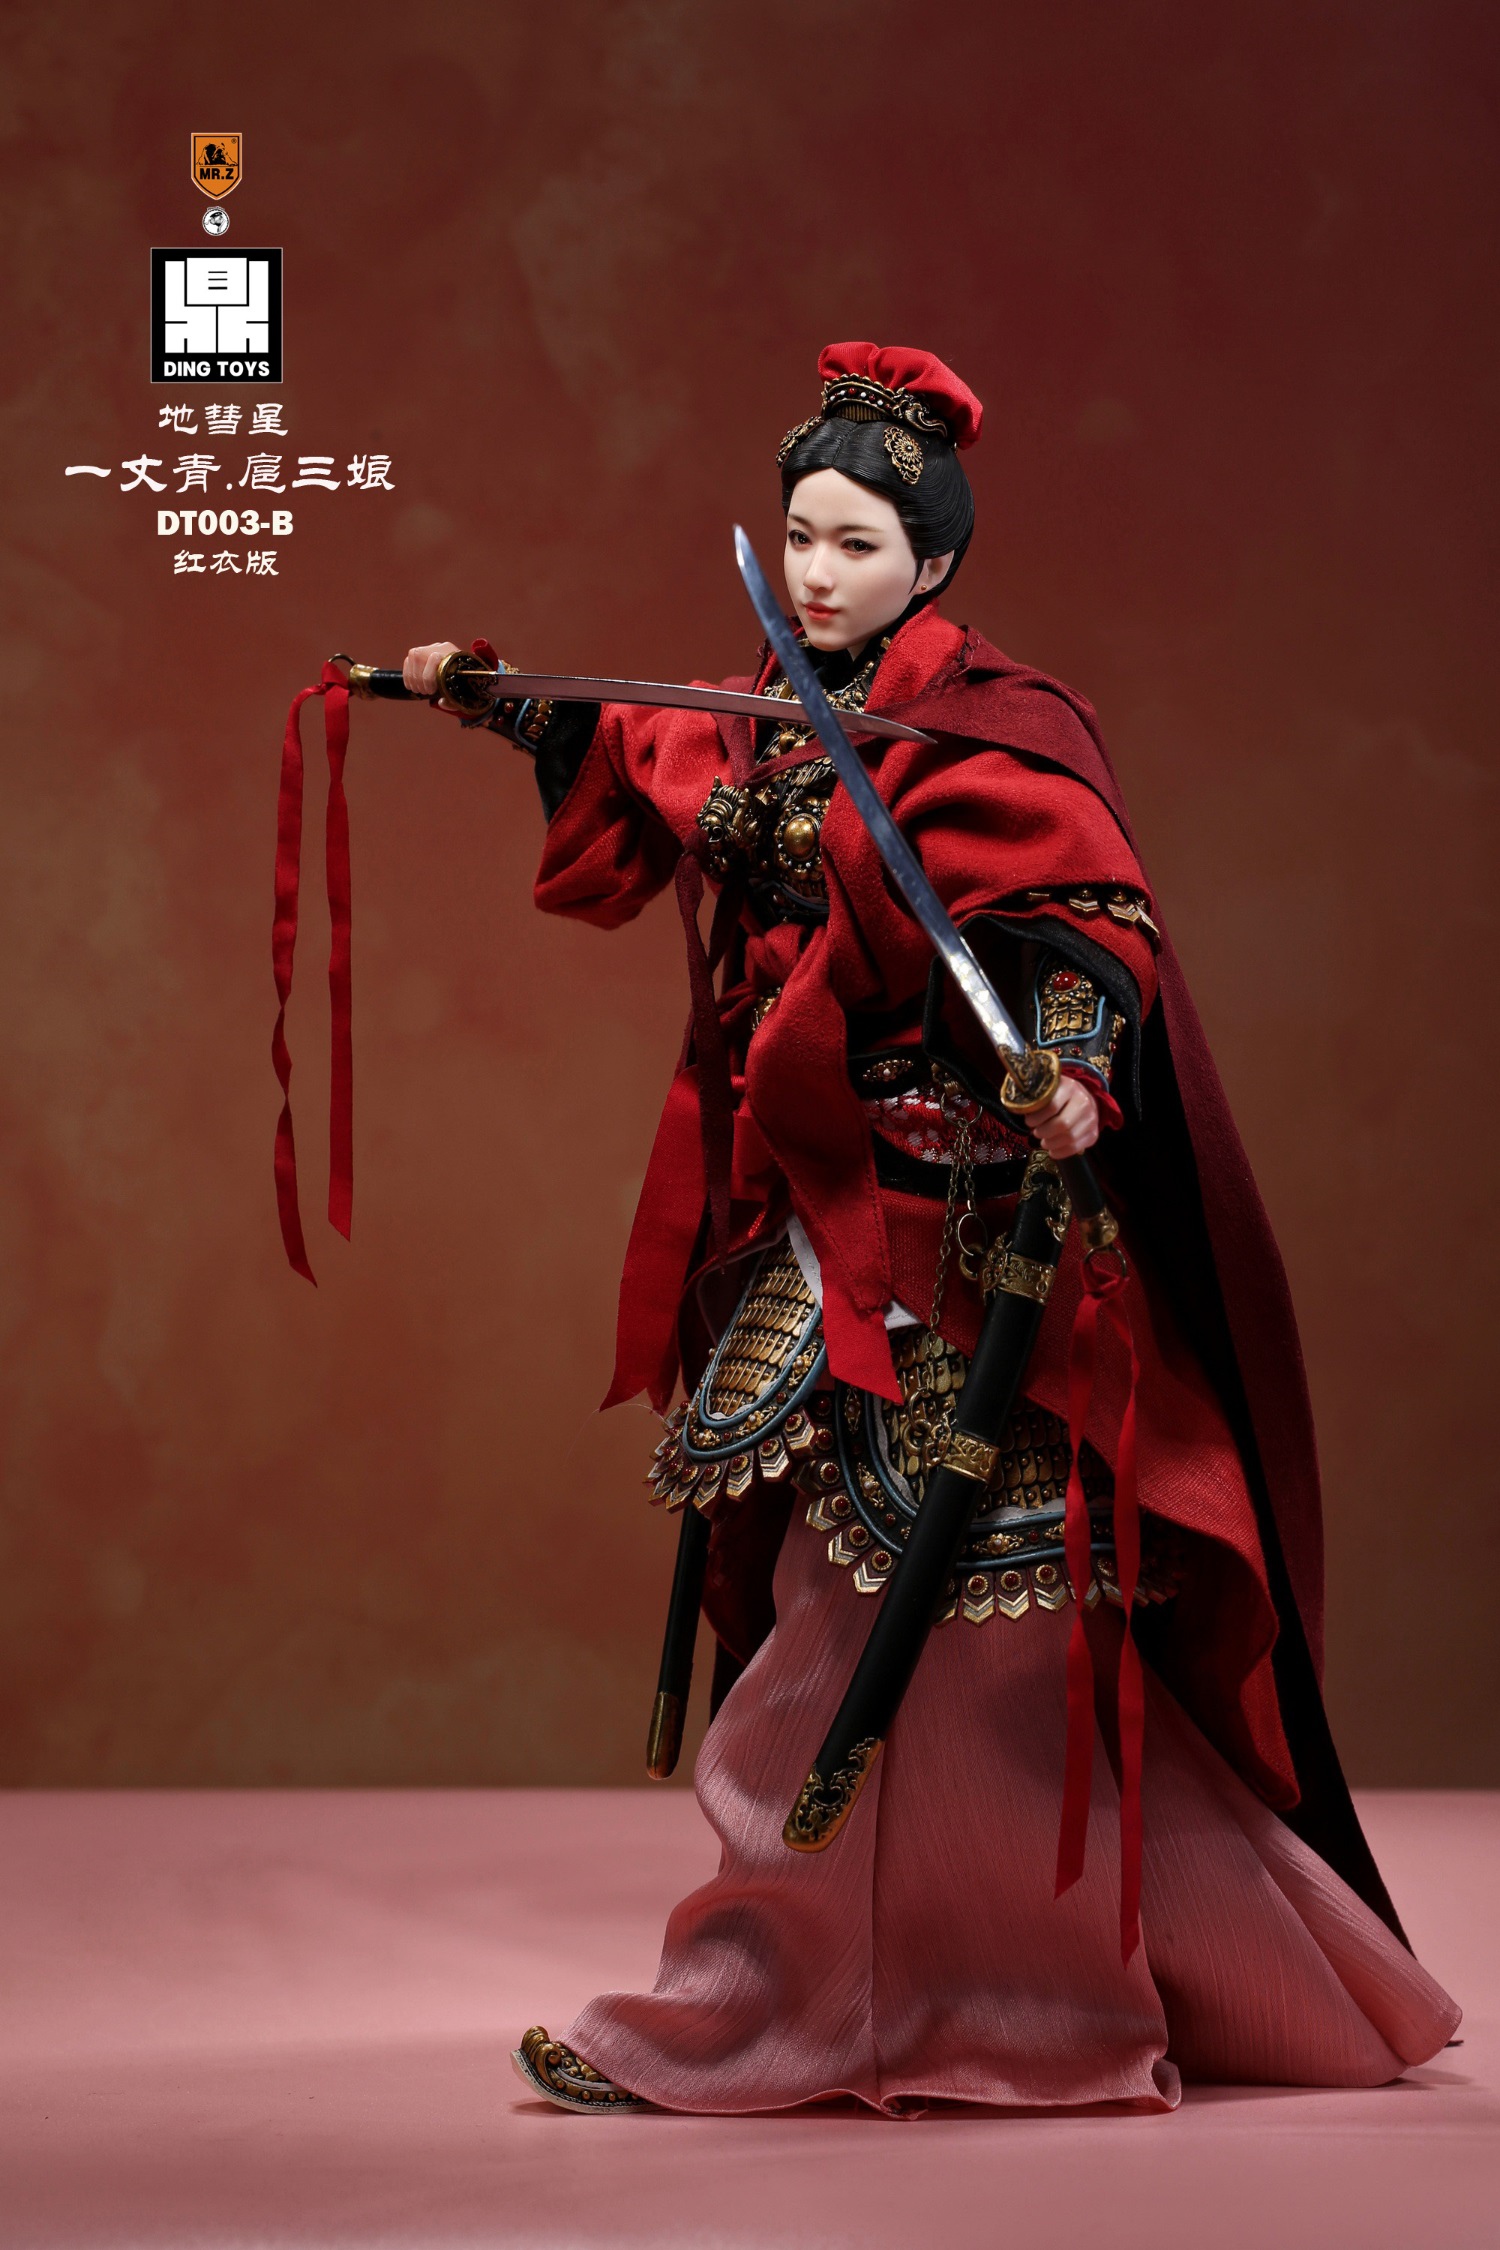 DingToys - NEW PRODUCT: Mr.Z x Ding Toys DT003 1/6 Scale 《Water Margin》Shiying Zhang (Green and Red versions), Horse (White) 2746